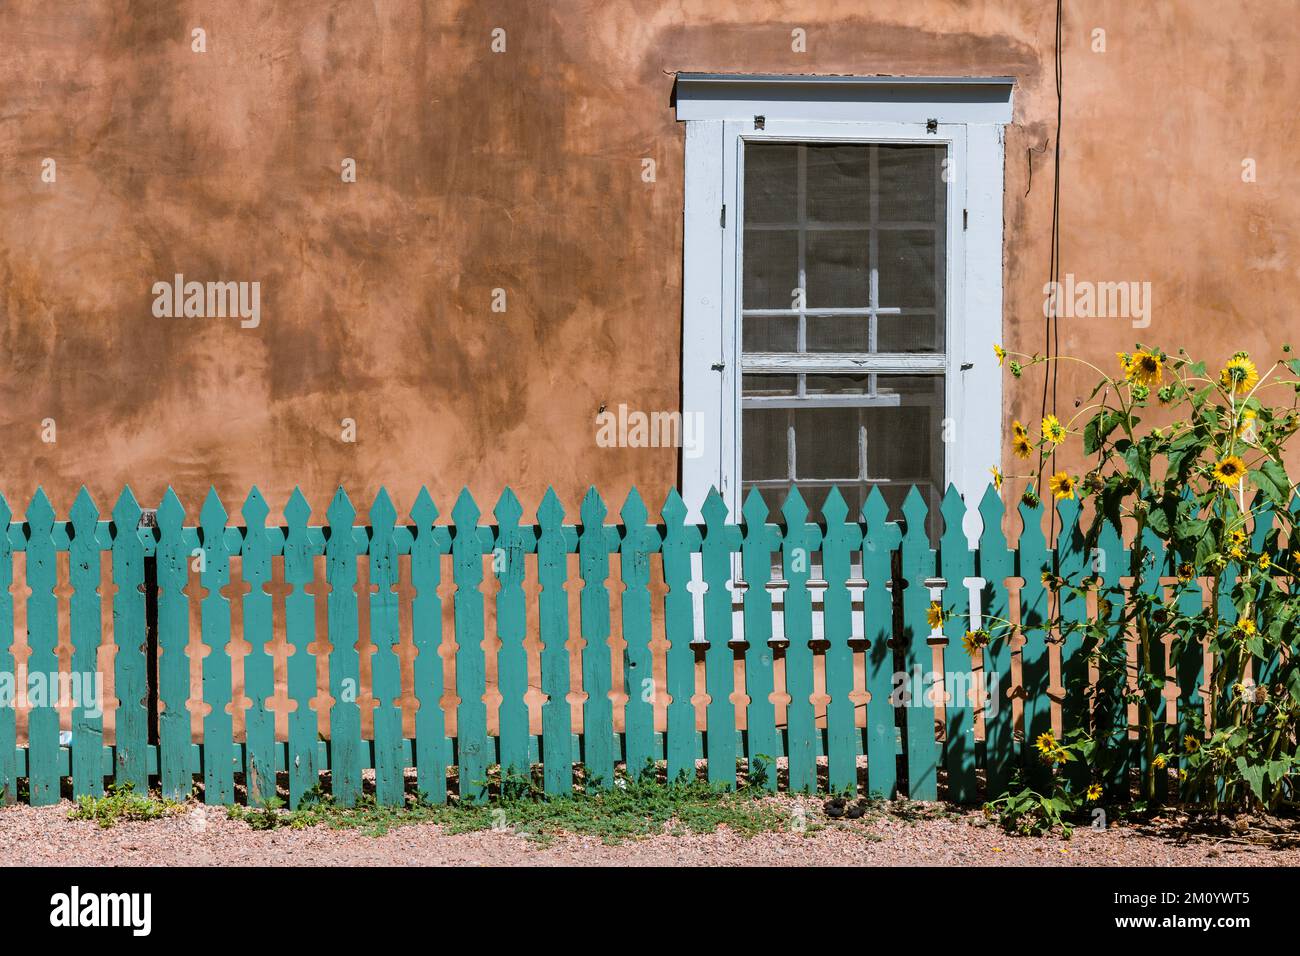 Sunflowers and turquoise color wood fence set in front of a window and old adobe wall in Santa Fe, New Mexico Stock Photo